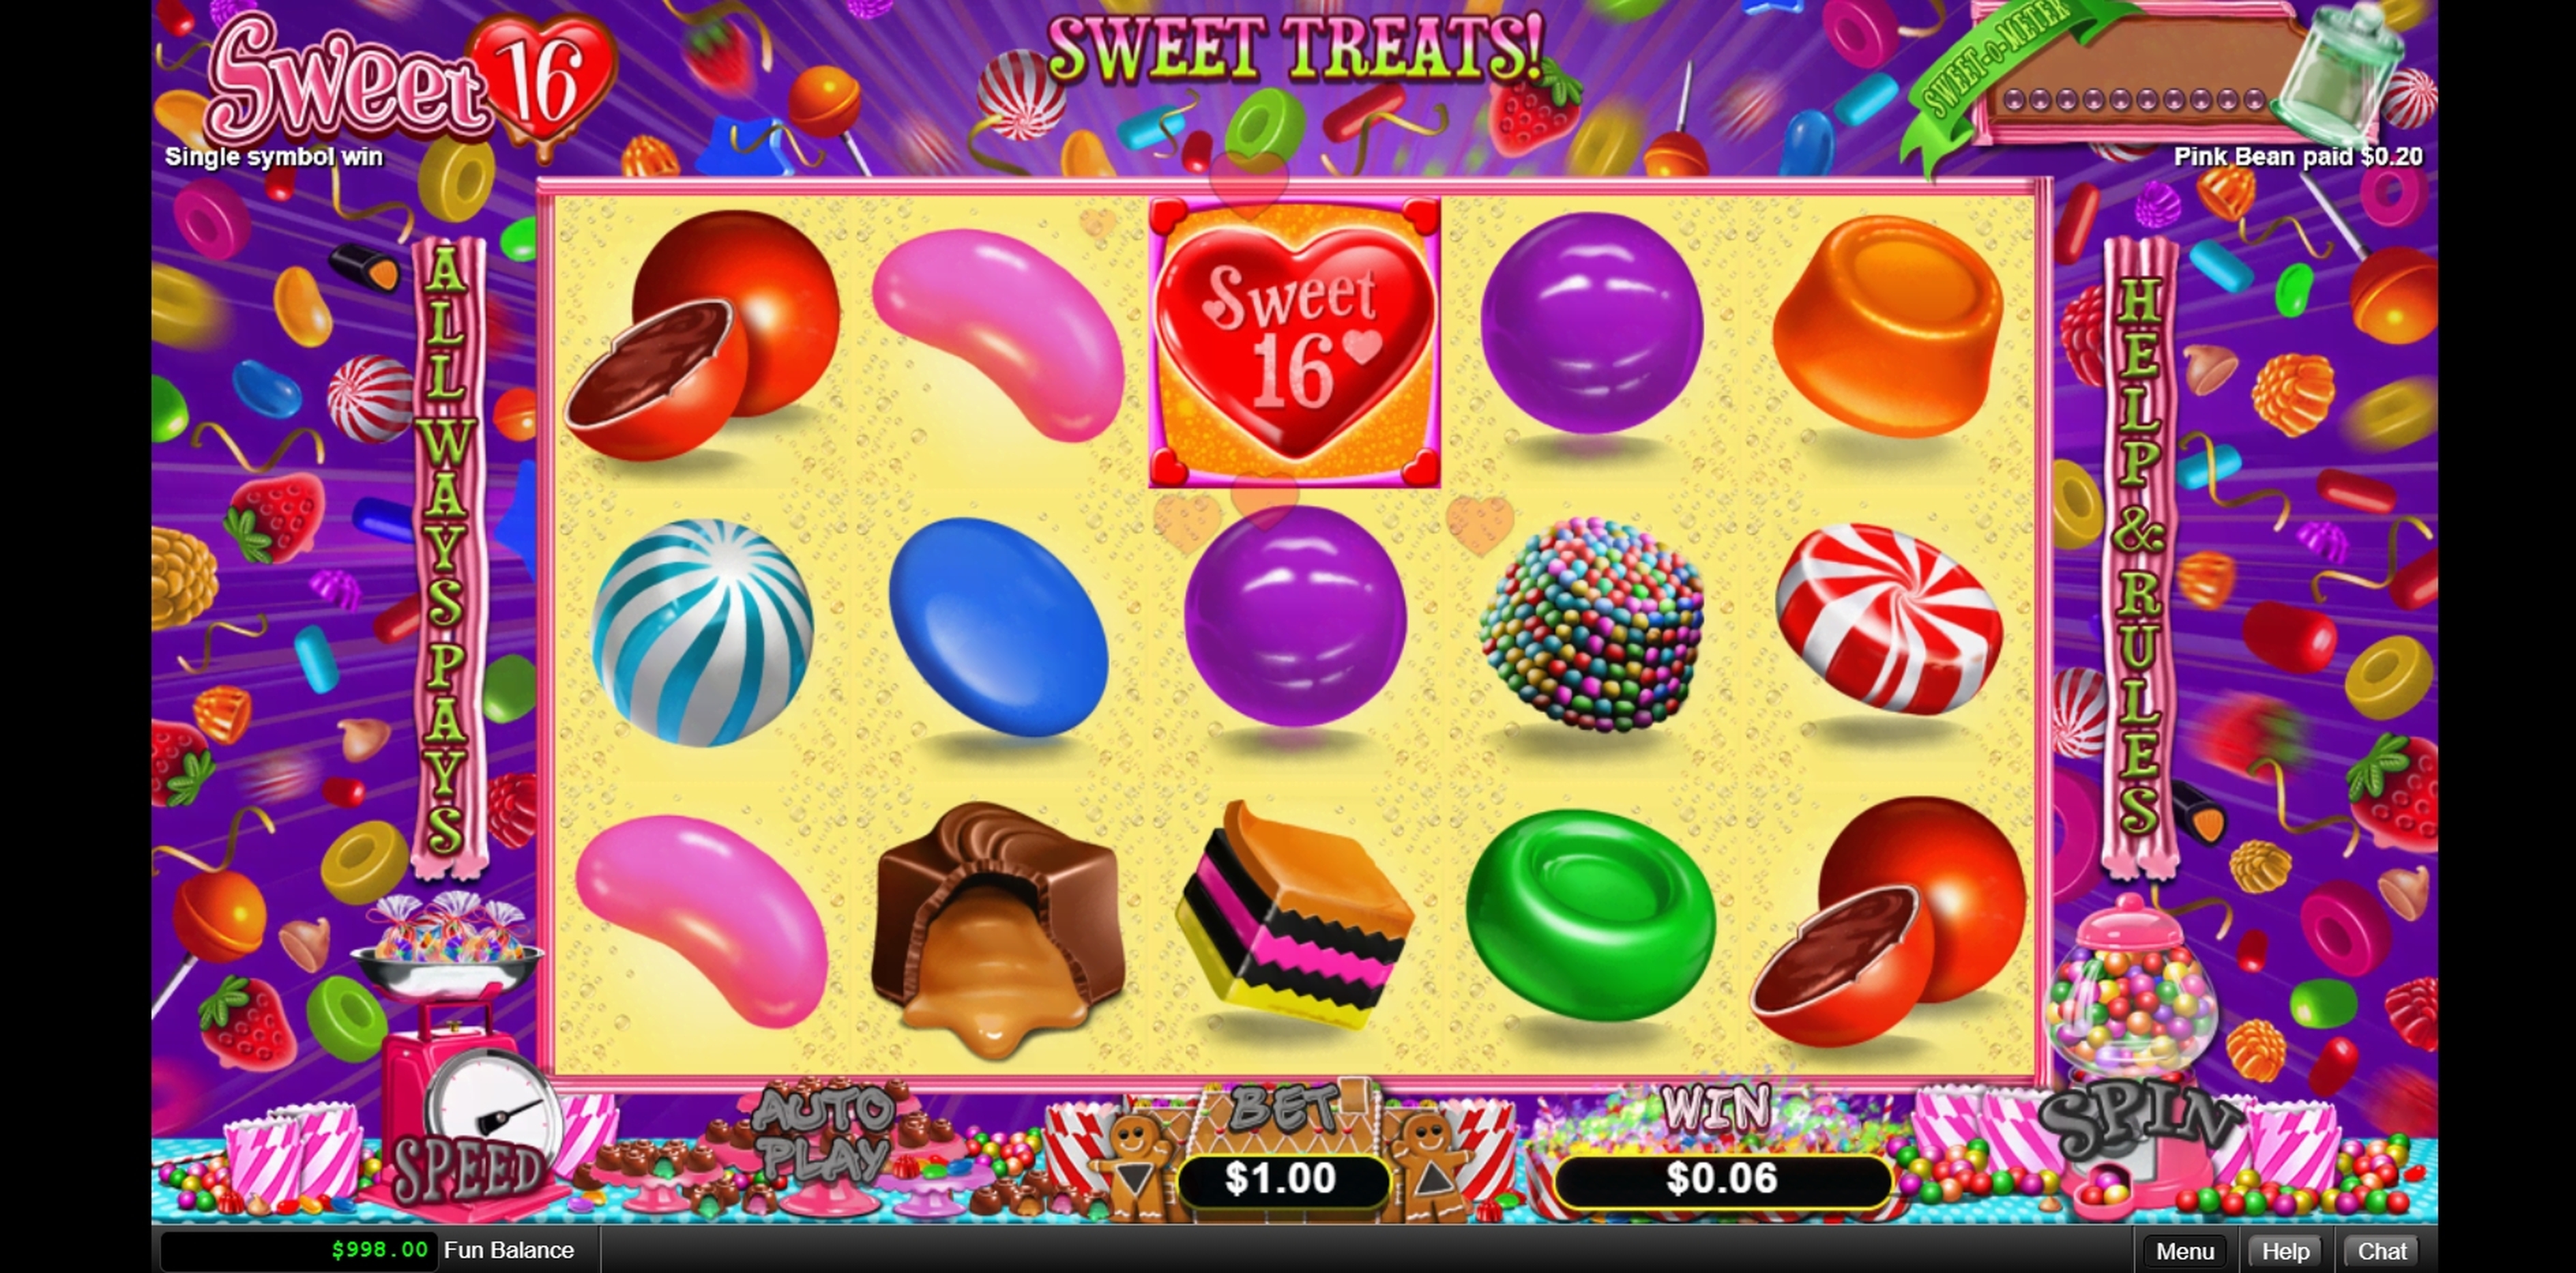 Win Money in Sweet 16 Free Slot Game by Real Time Gaming